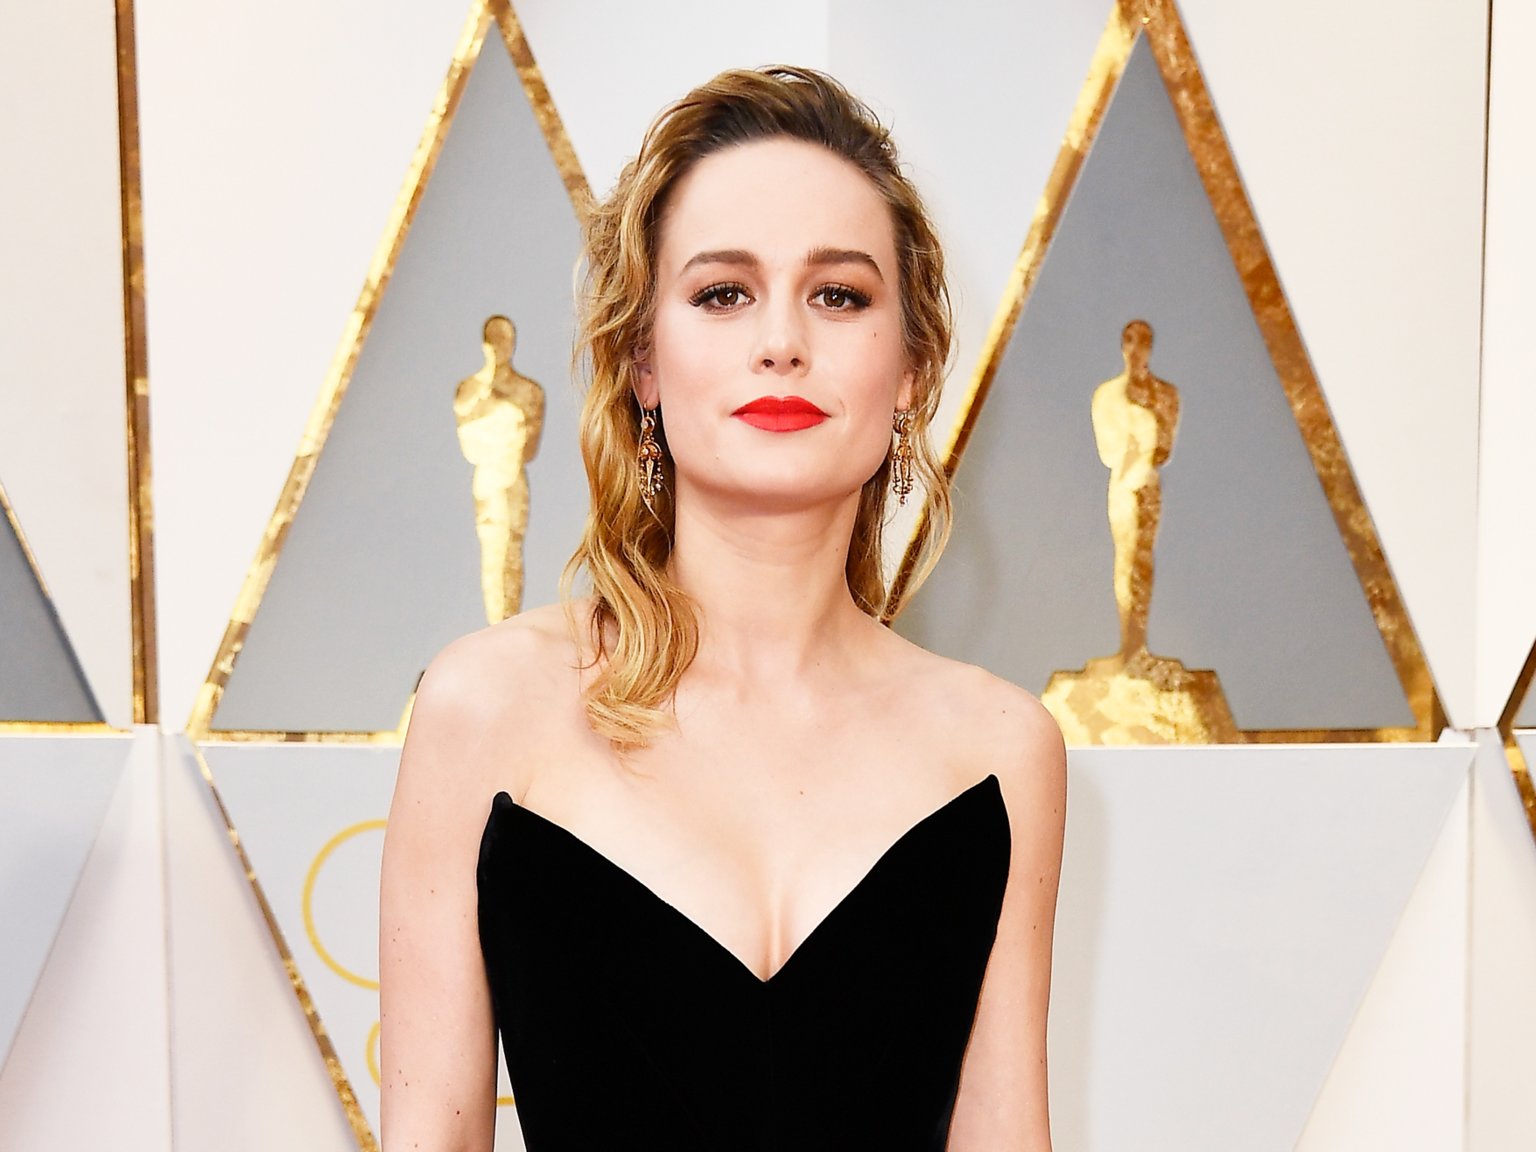 Actress Brie Larson says women face a ‘trap’ when they try to demand more from their paycheck. Here’s her advice for getting out of it